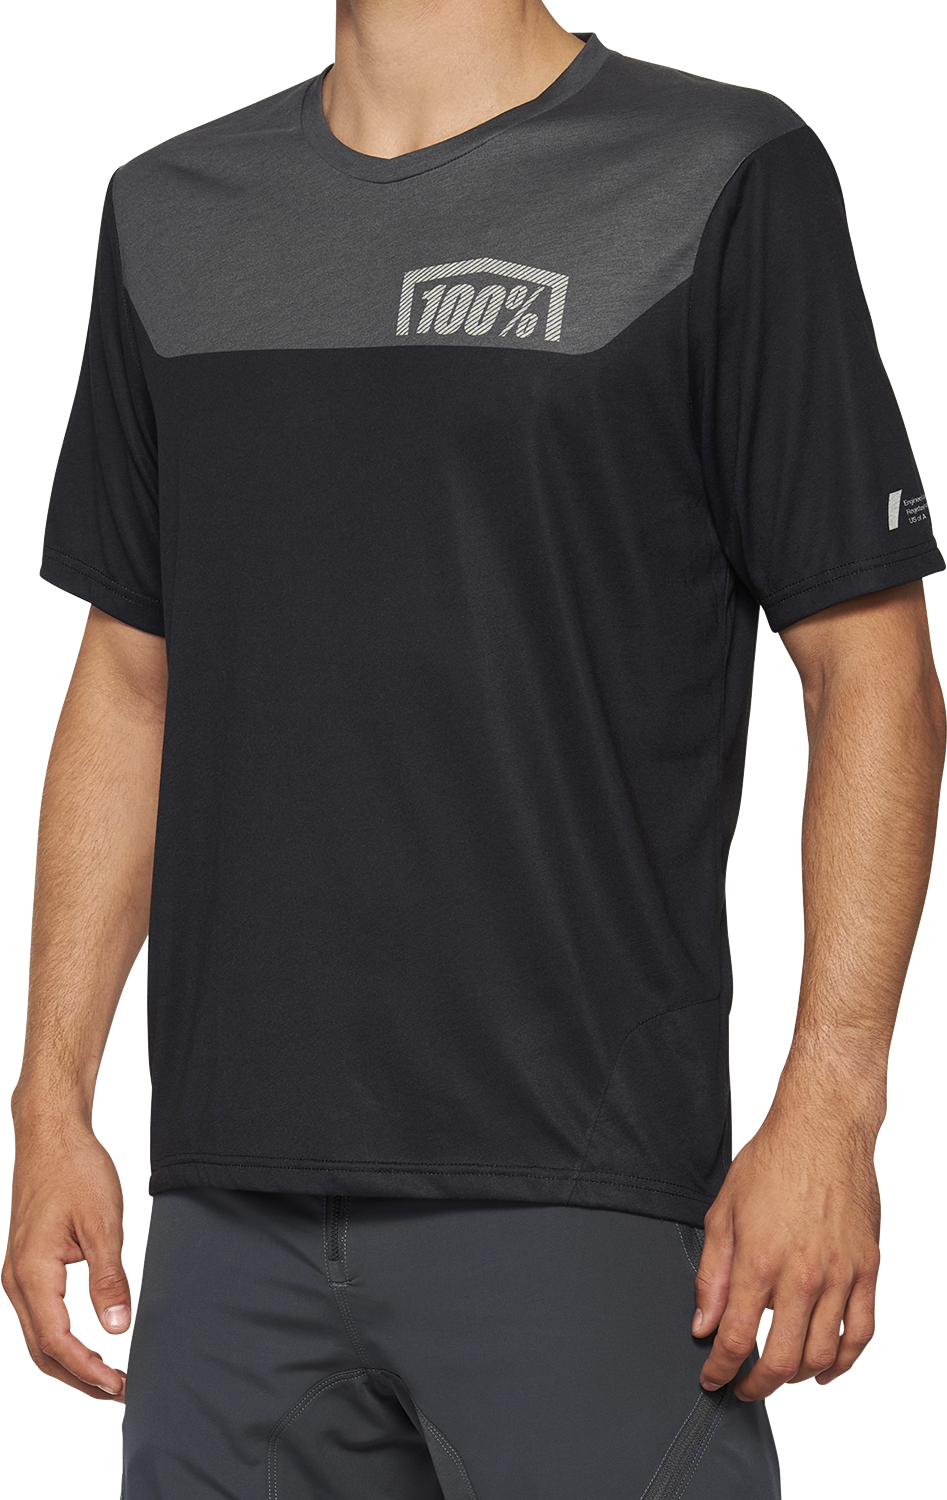 100% Airmatic Jersey - Short-Sleeve - Black/Charcoal - XL 40014-00003